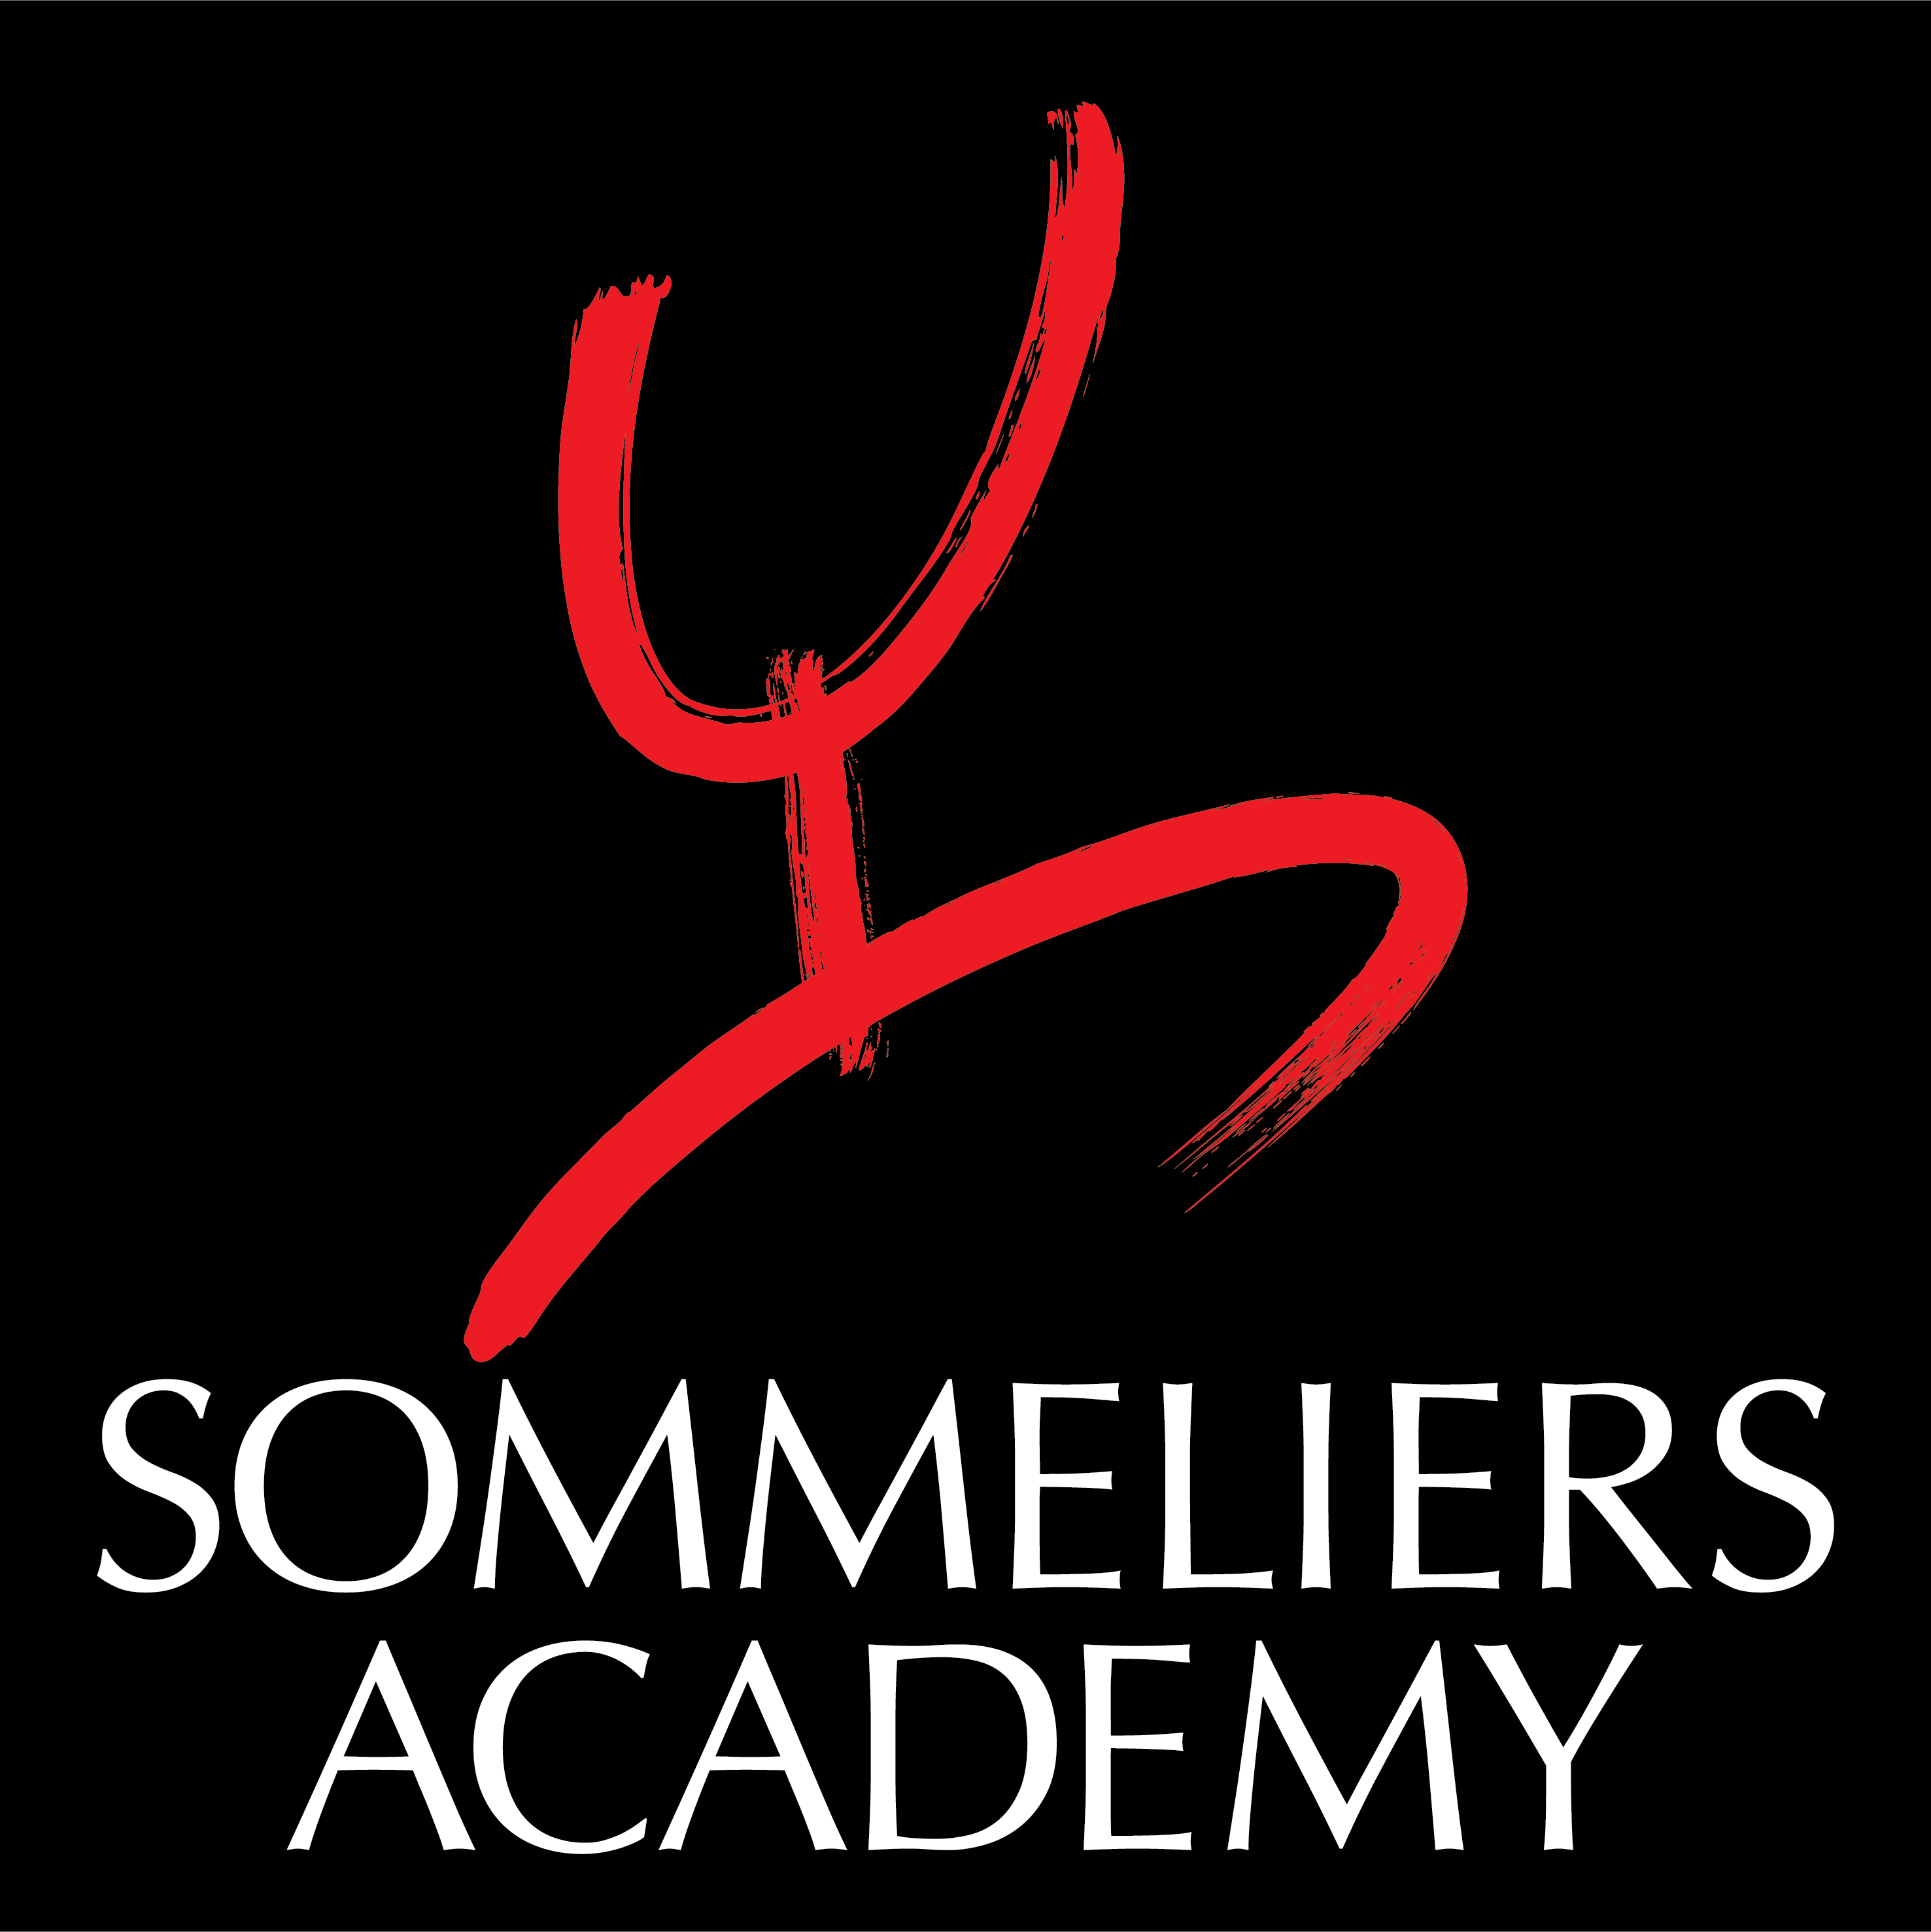 SOMMELIERS ACADEMY